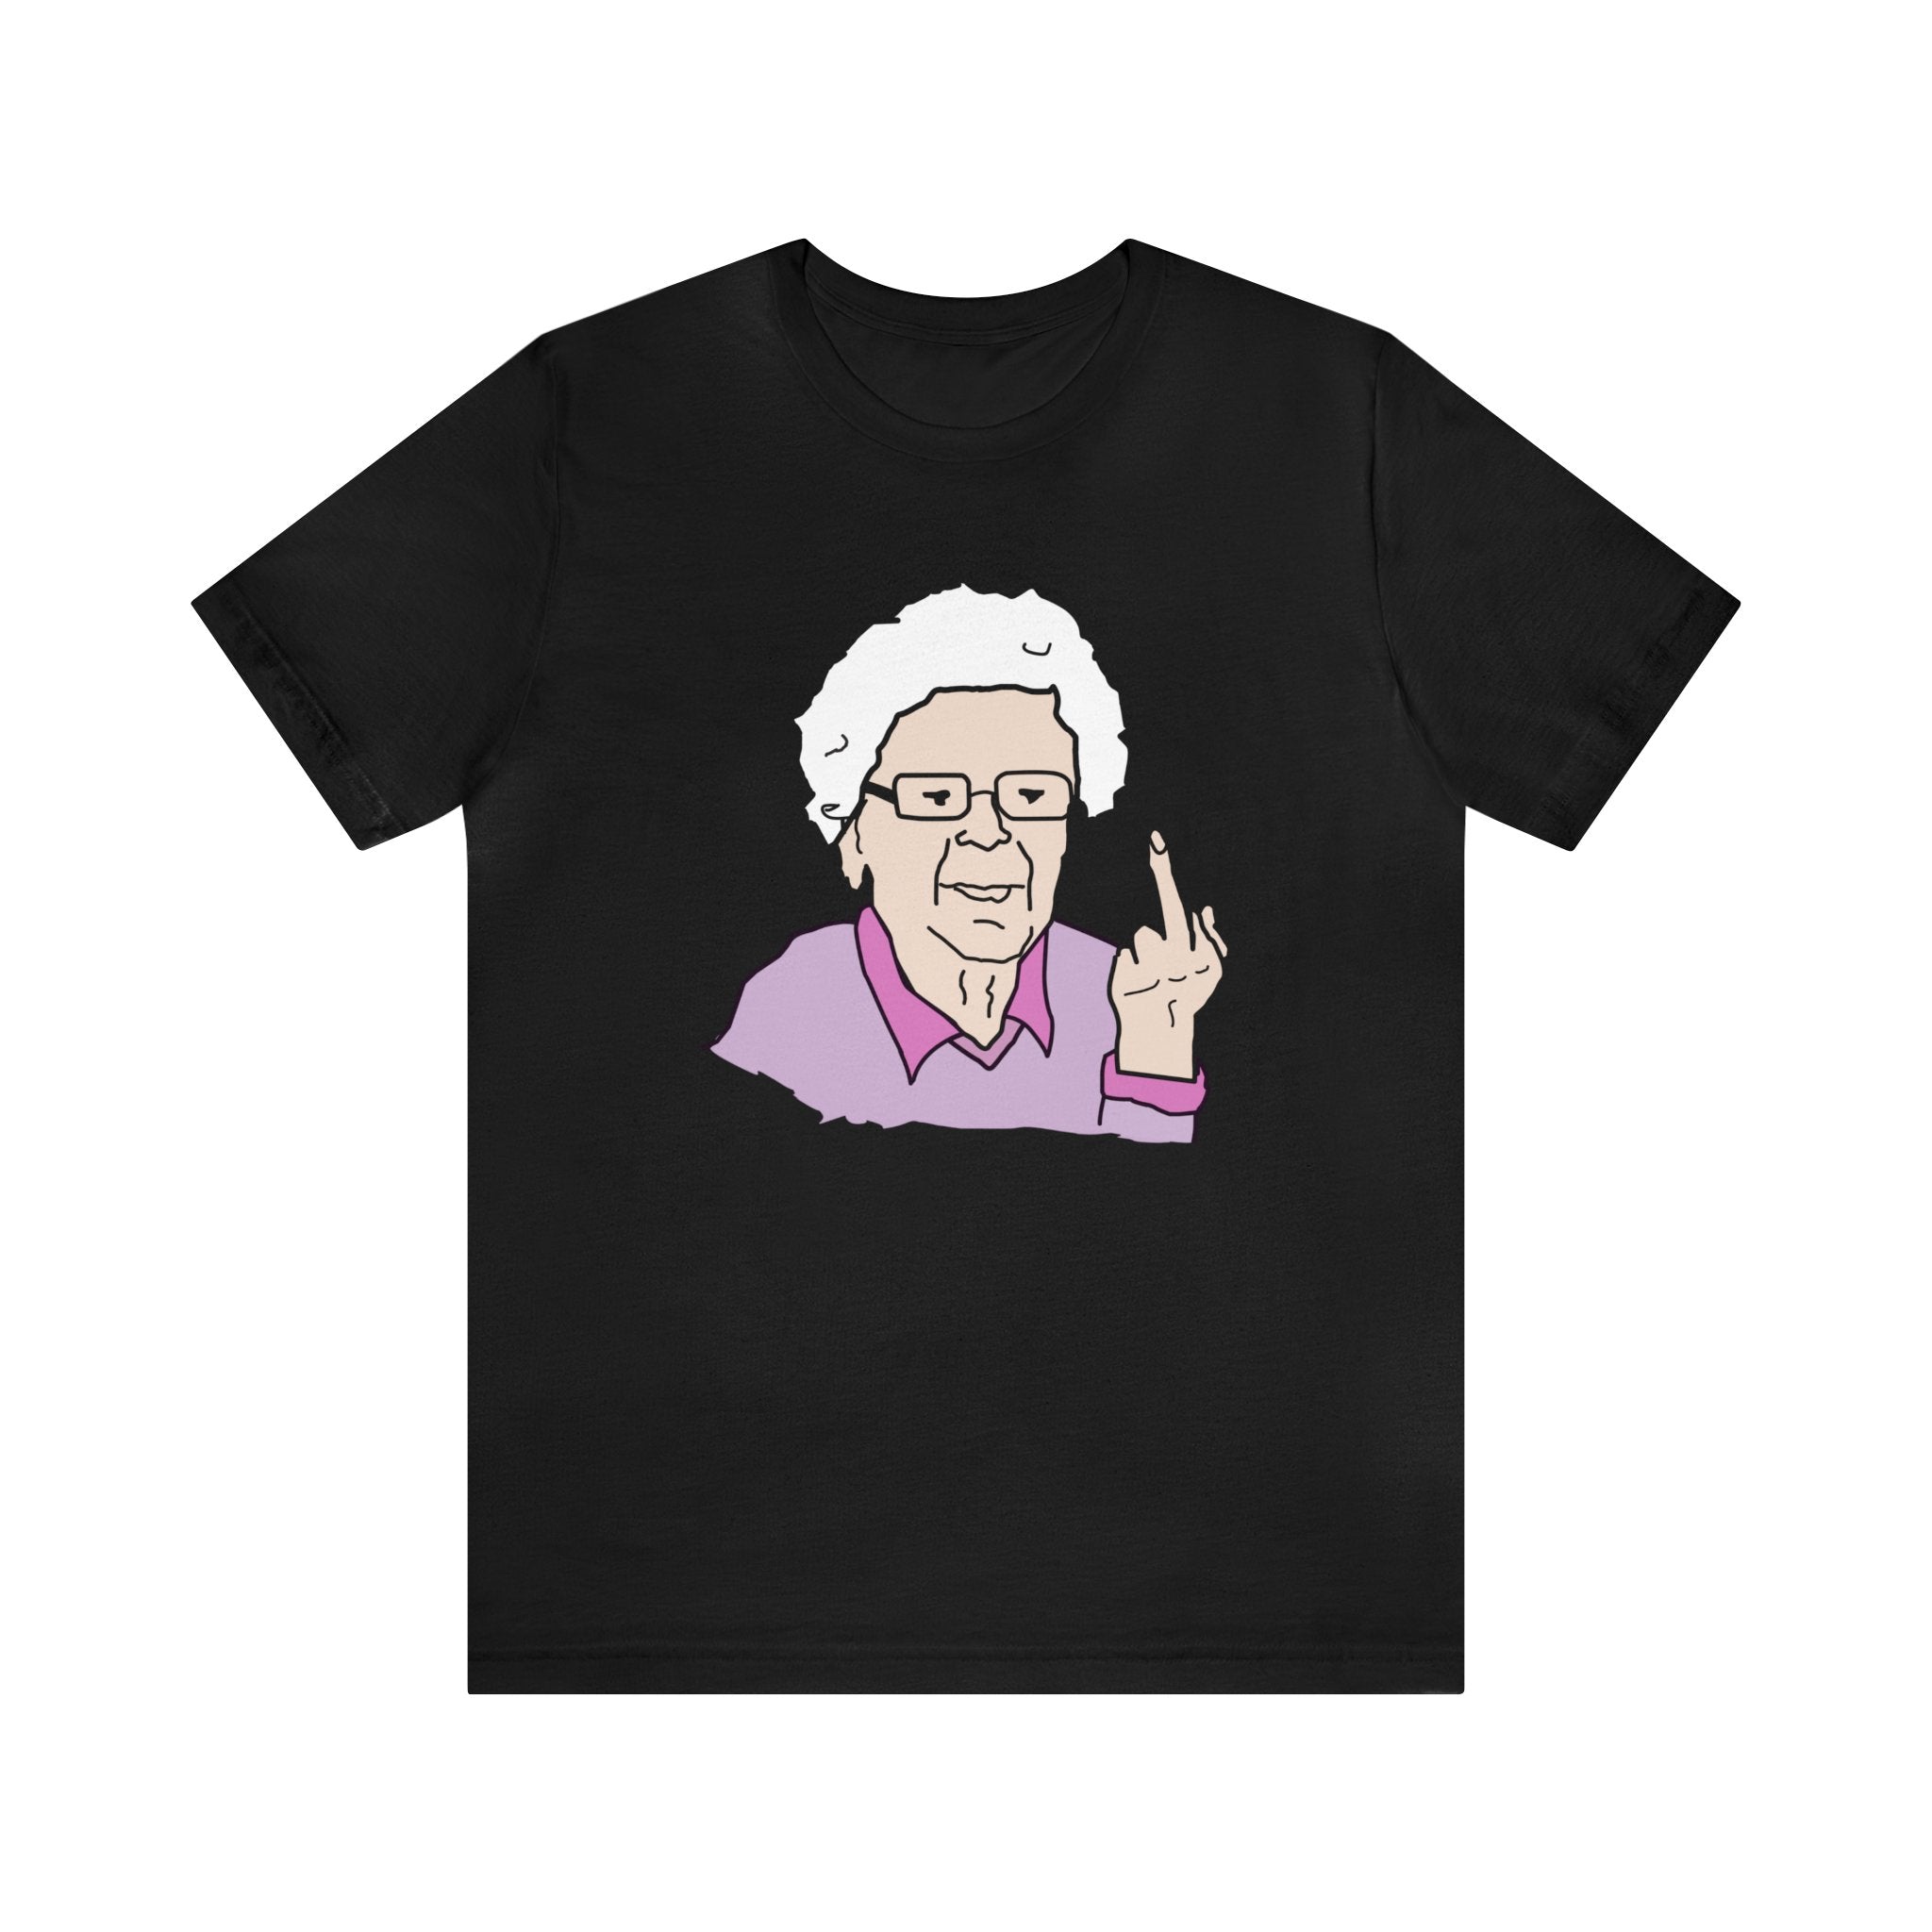 Order now for this Granny T-shirt featuring a drawing of a woman. Perfect for grandmas!